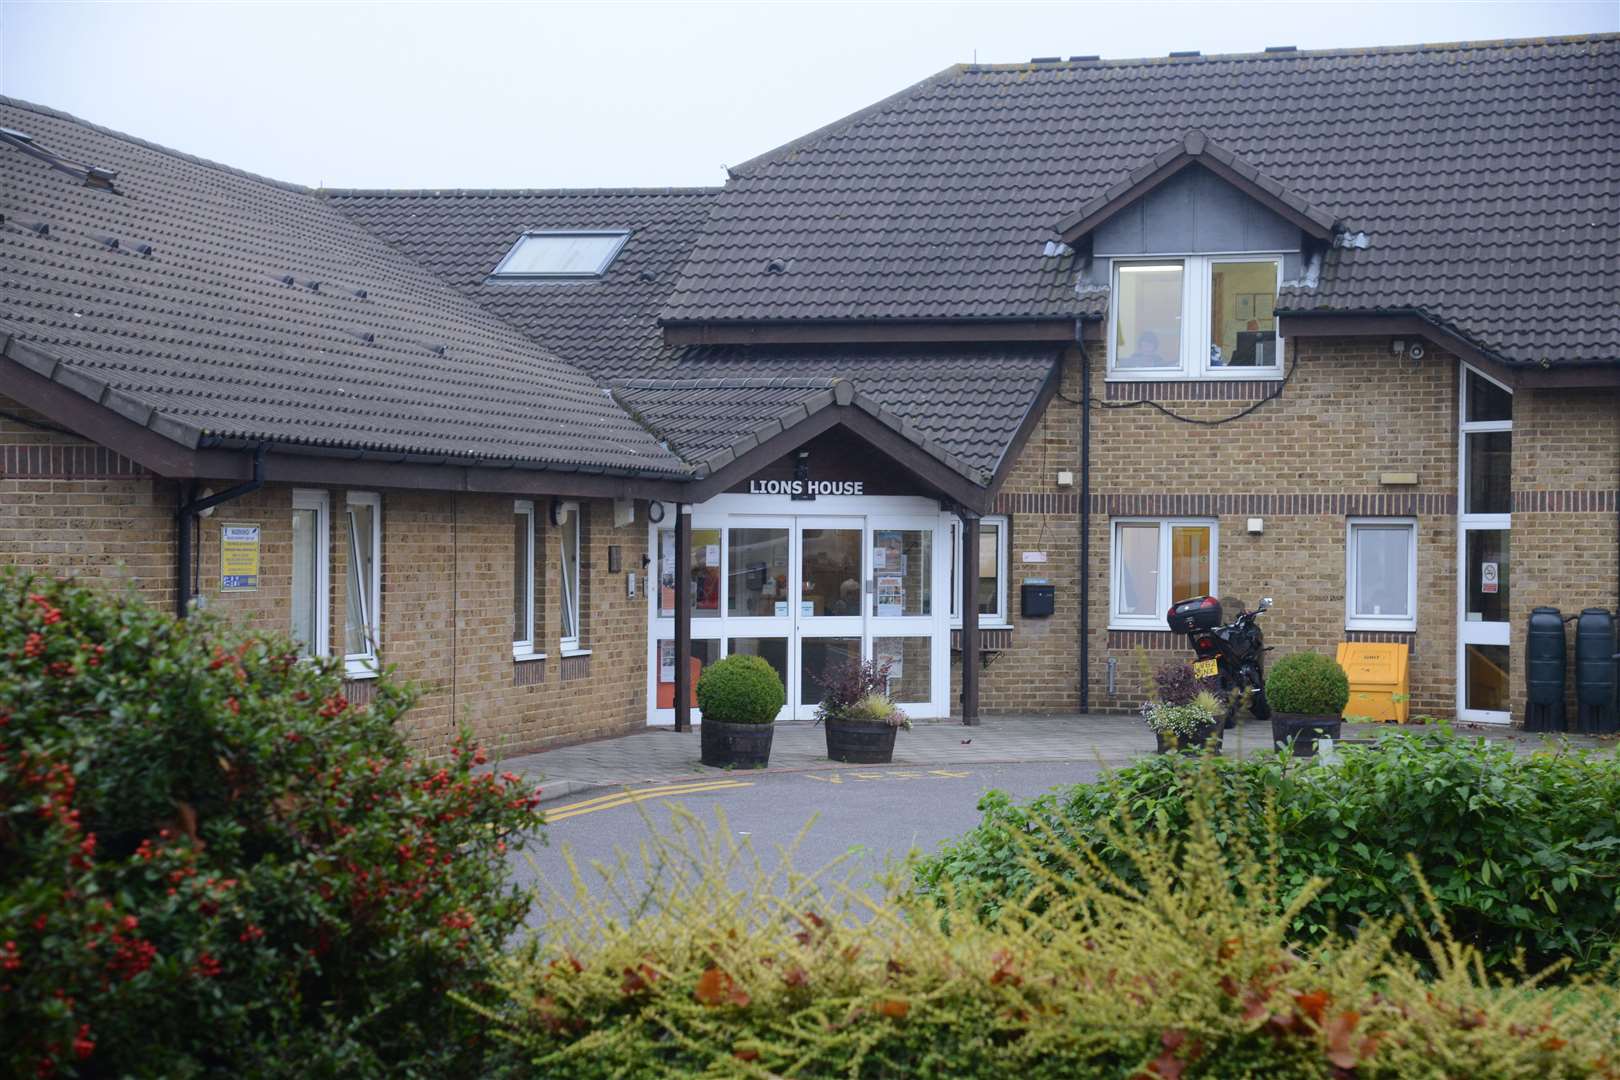 Ellenor hospice predicted it would lost around £1.1m during the pandemic from lost income and donations